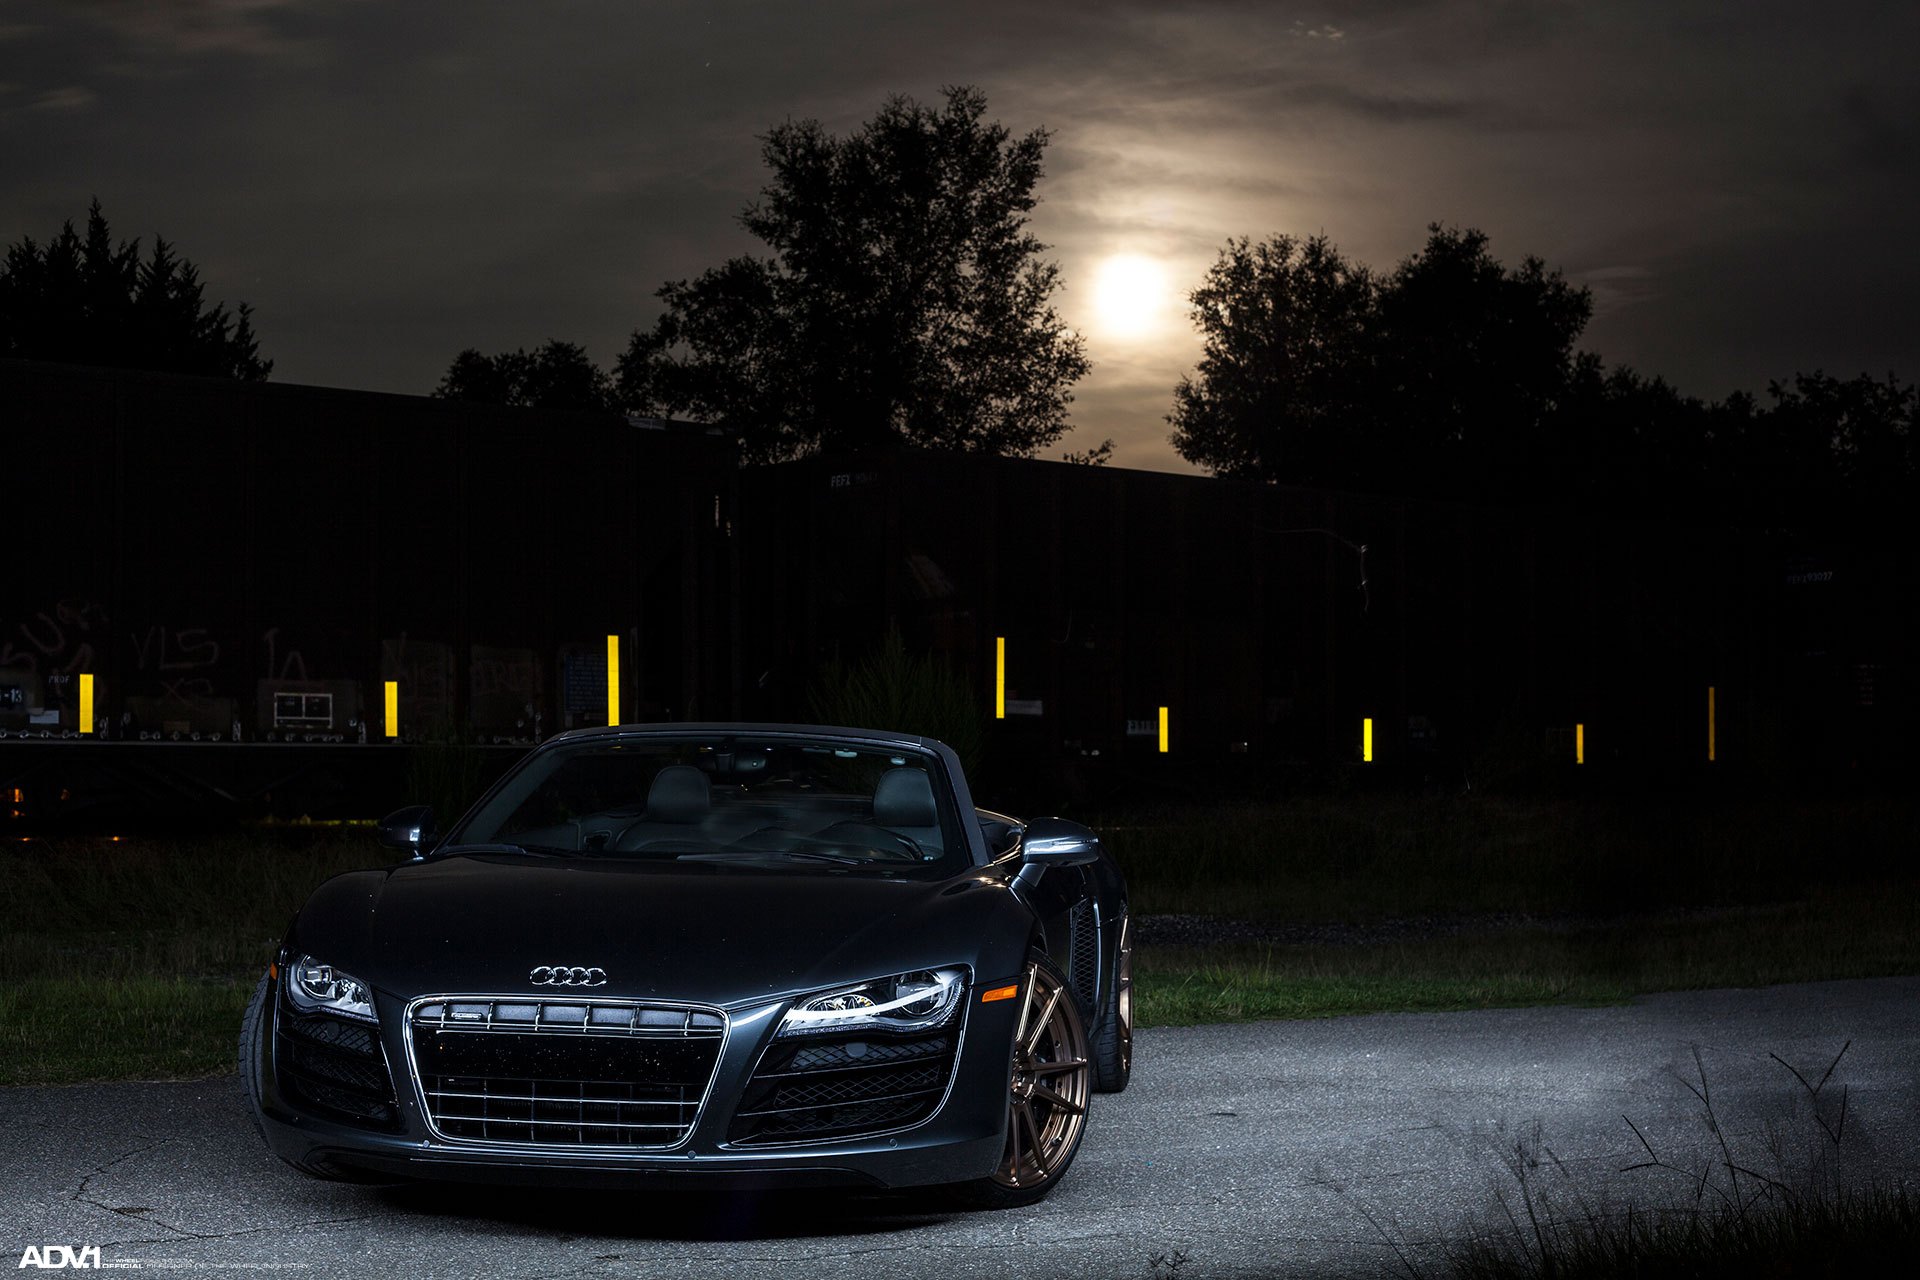 Aftermarket Front Bumper on Gray Convertible Audi R8 - Photo by ADV.1